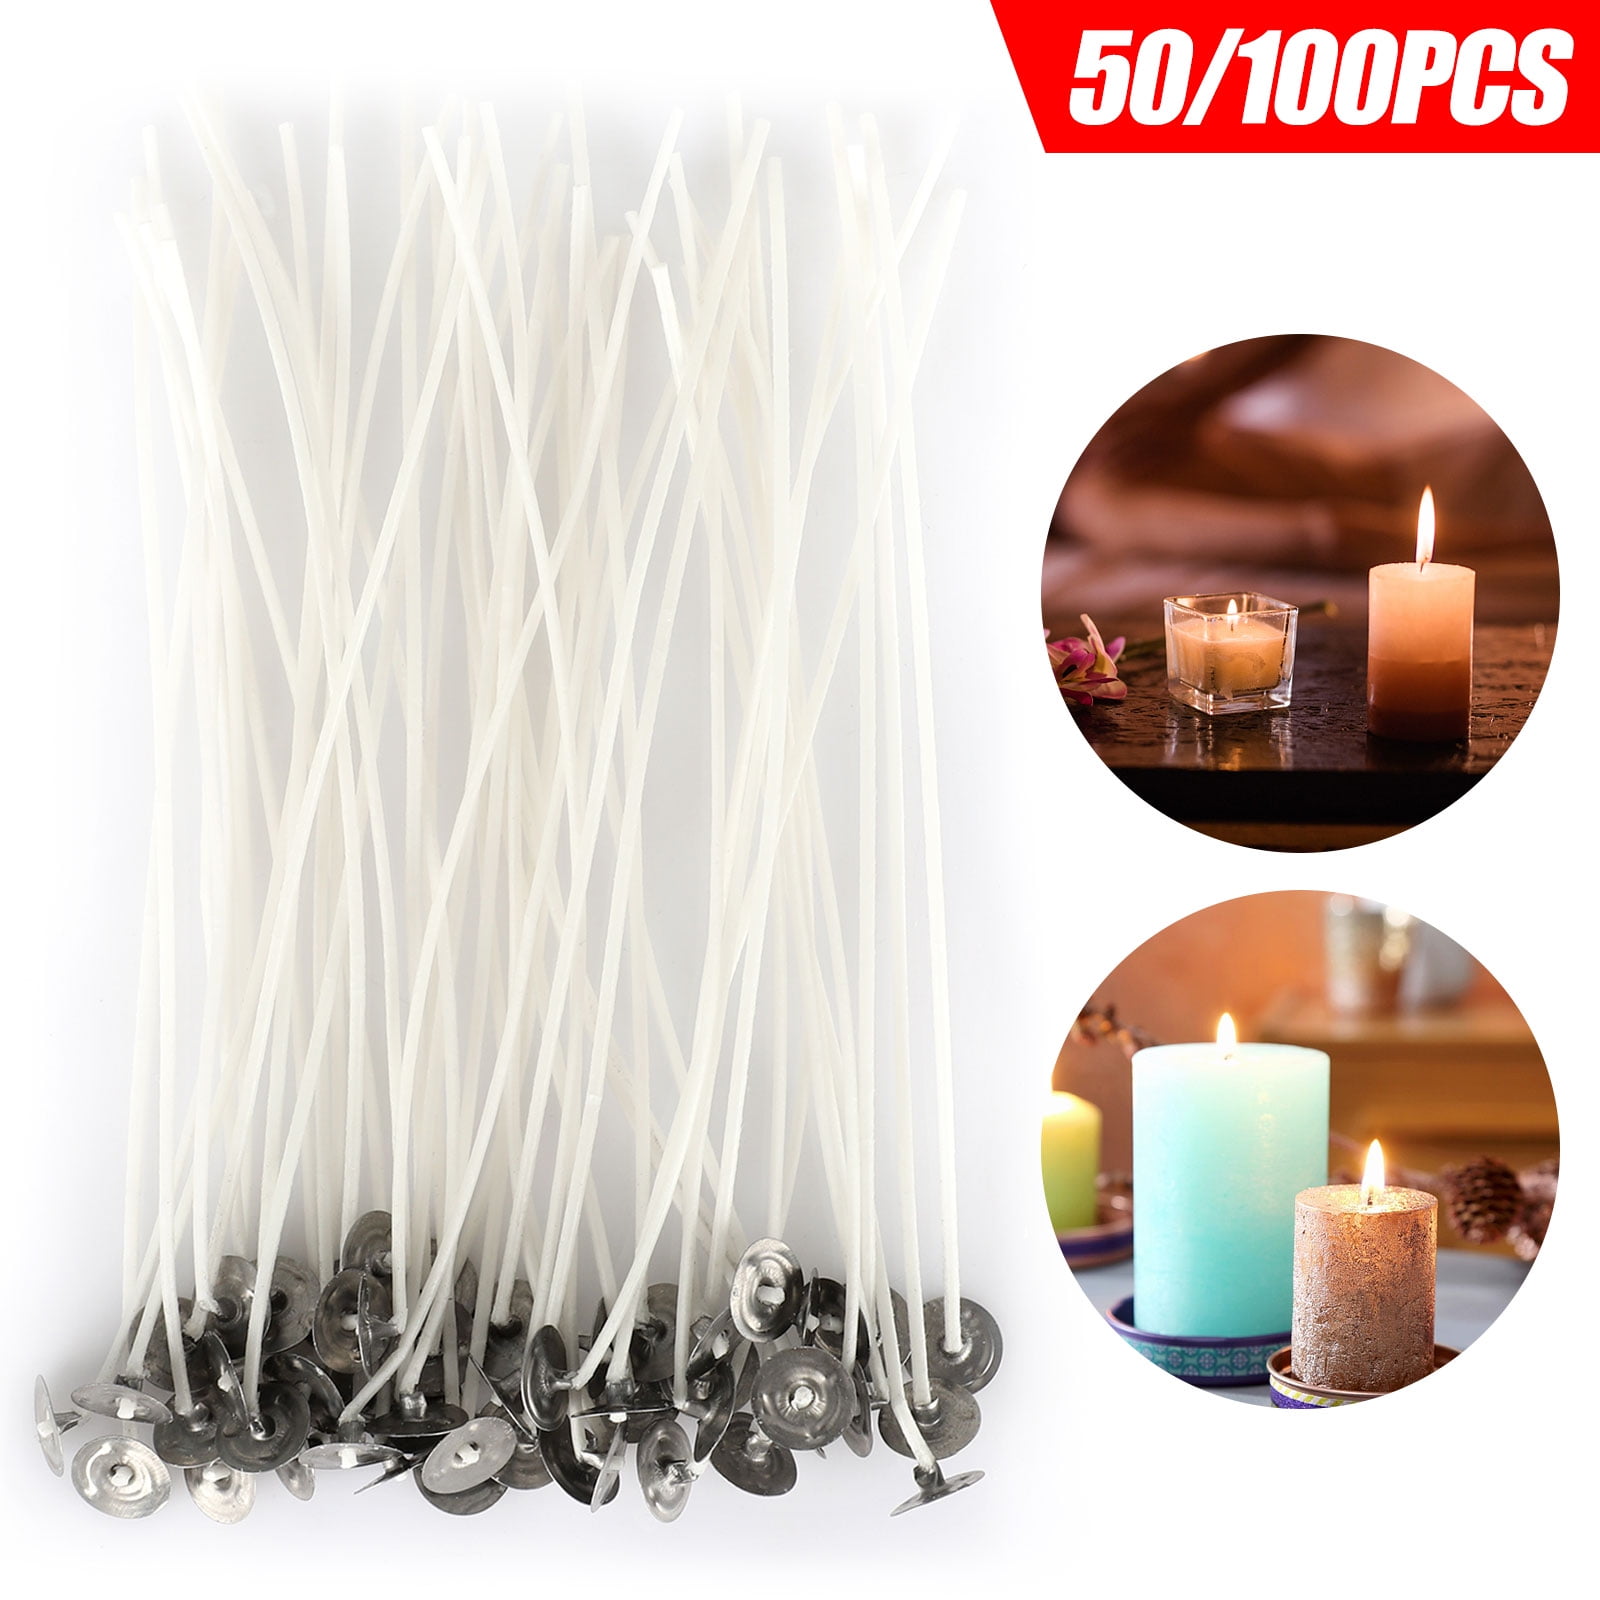 10 x 22,24,26,28,30 cm 50 x Pre Waxed Wicks for Candle Making with Sustainers 